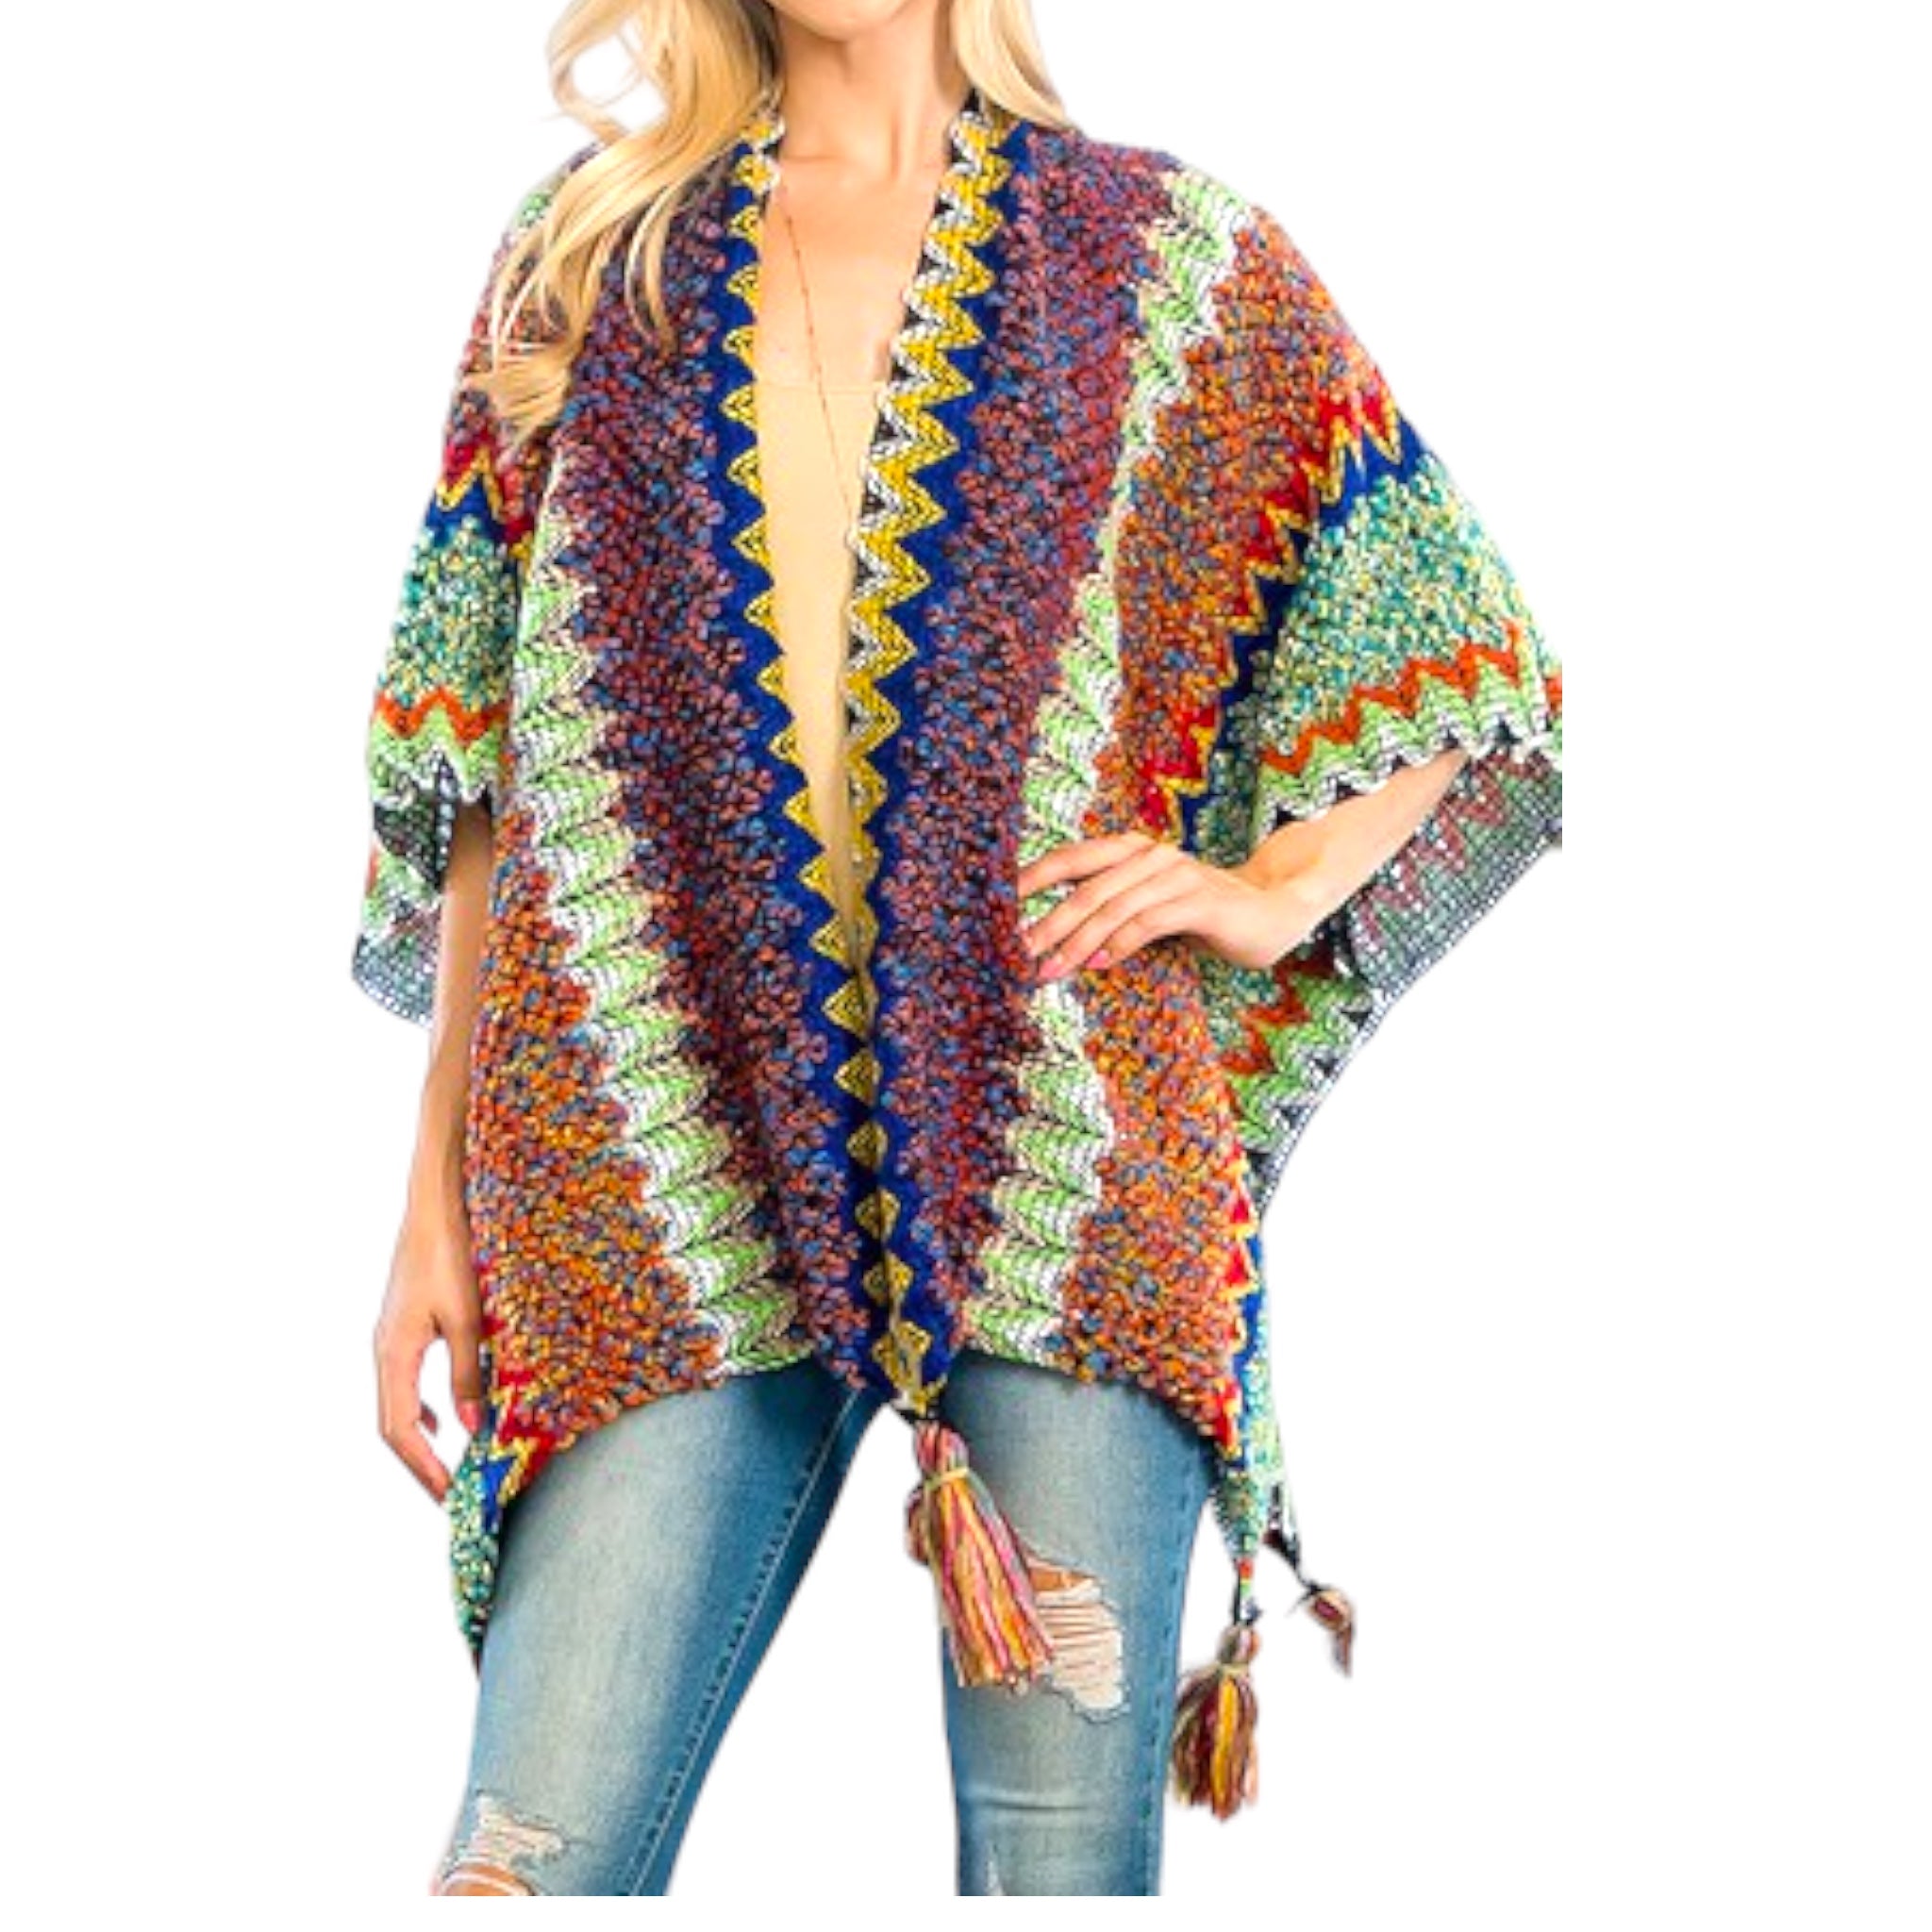 Women's Chic Chevron-Style Poncho - Fabulously Dressed Boutique 